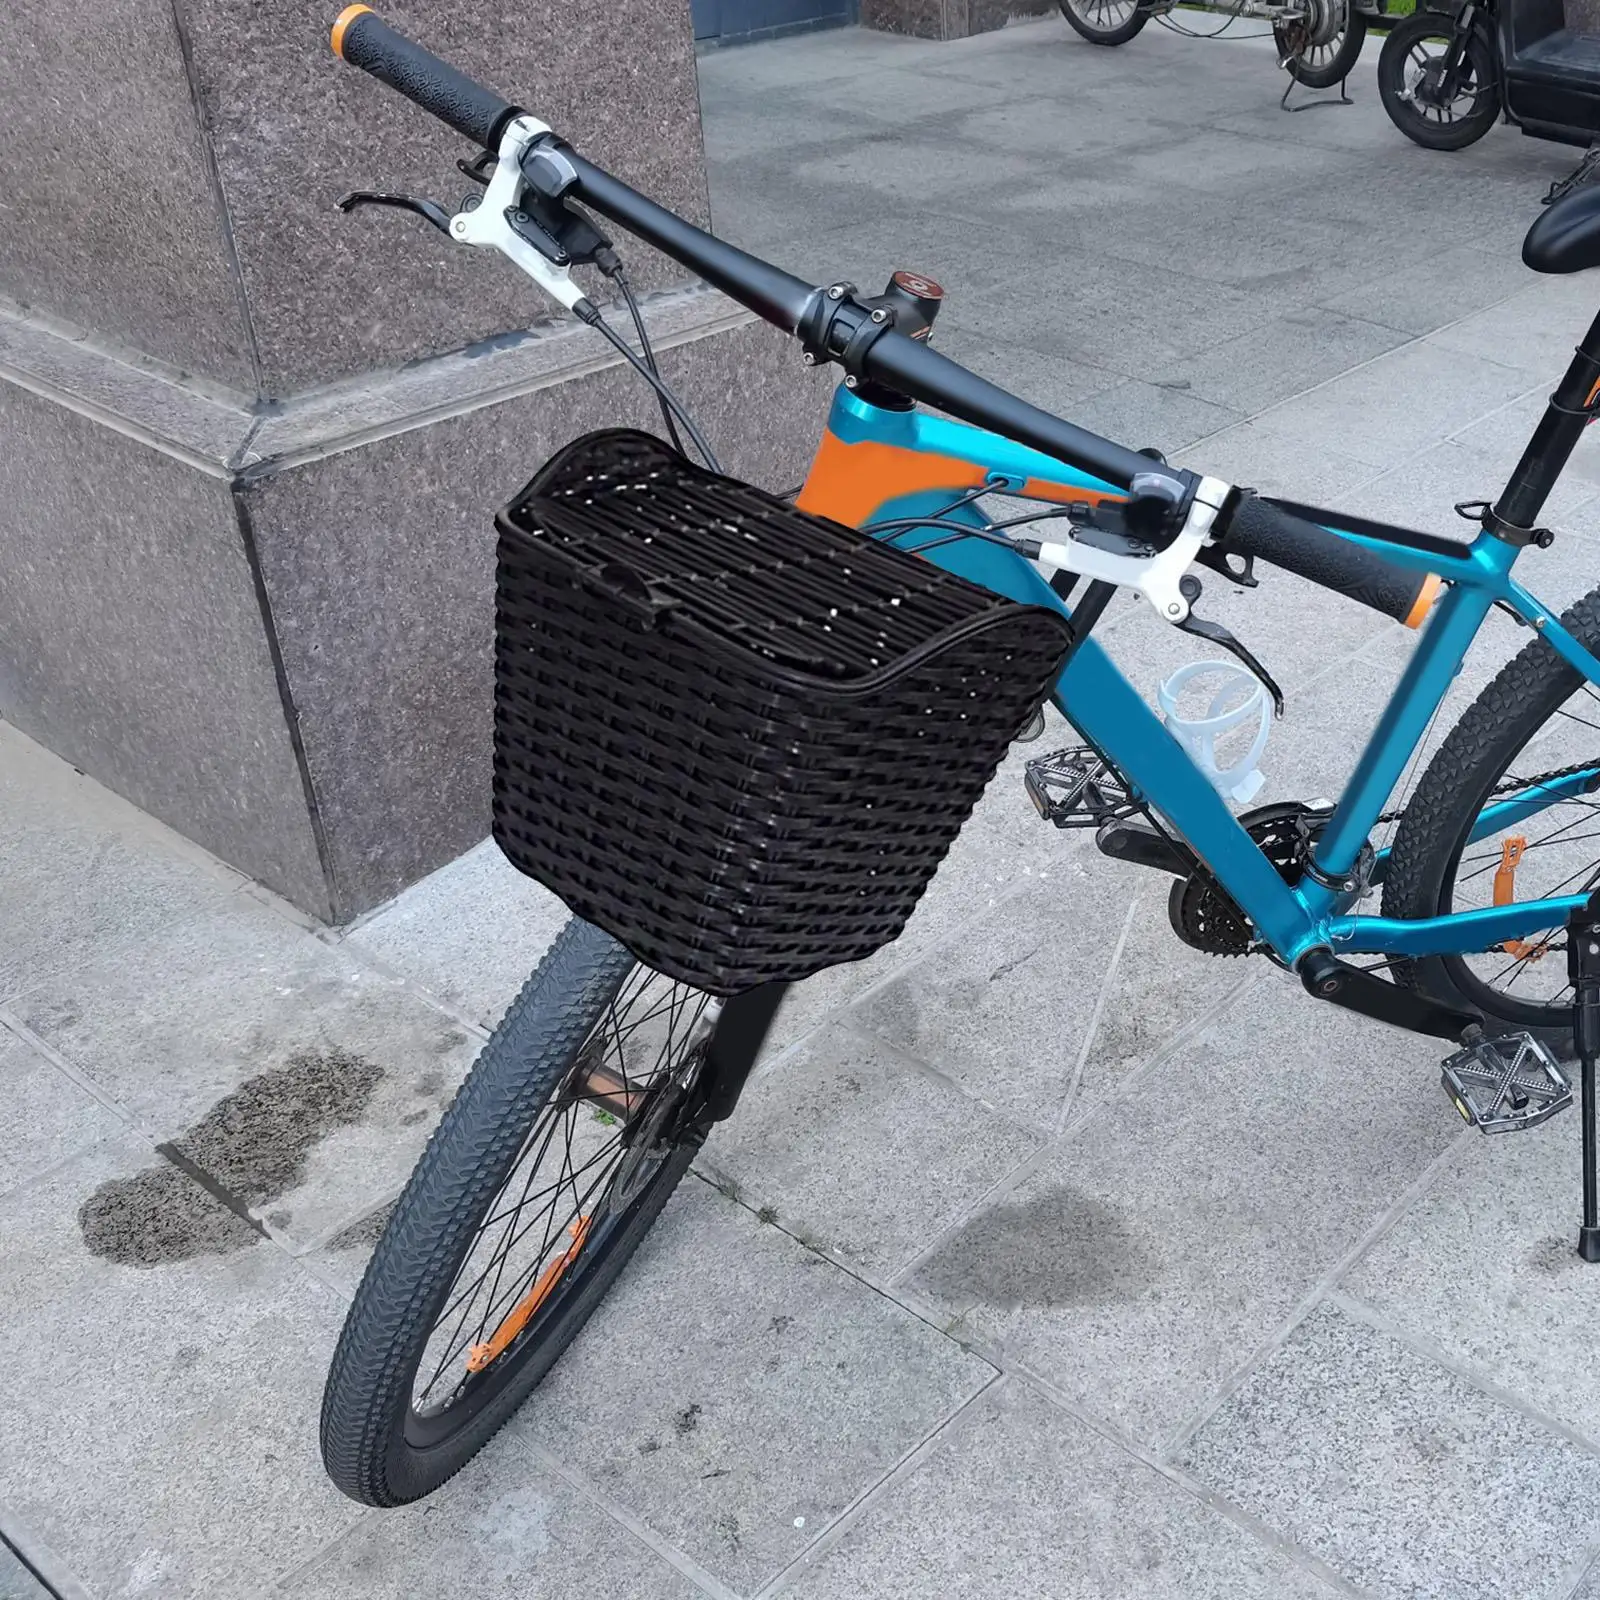 Detchable Bike Basket with Lid Sundries Container Scooter Bicycle Front Basket for Pet Adult Kids Shopping Bike Accessories